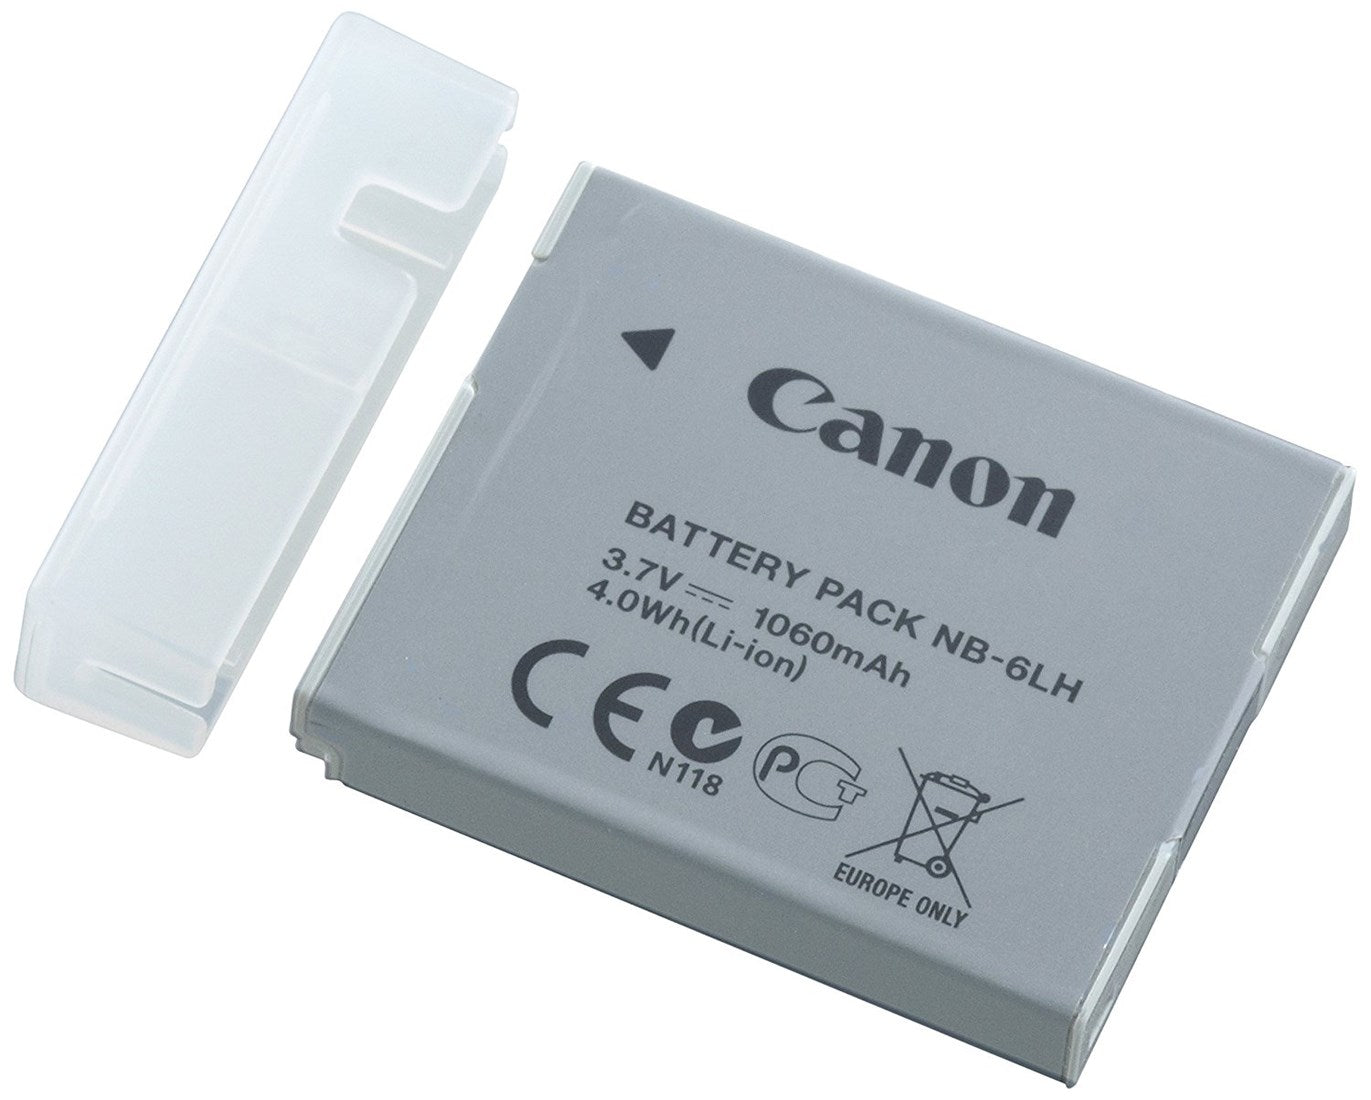 Canon 1060mAh Battery Pack for NB-6LH - Product Photo